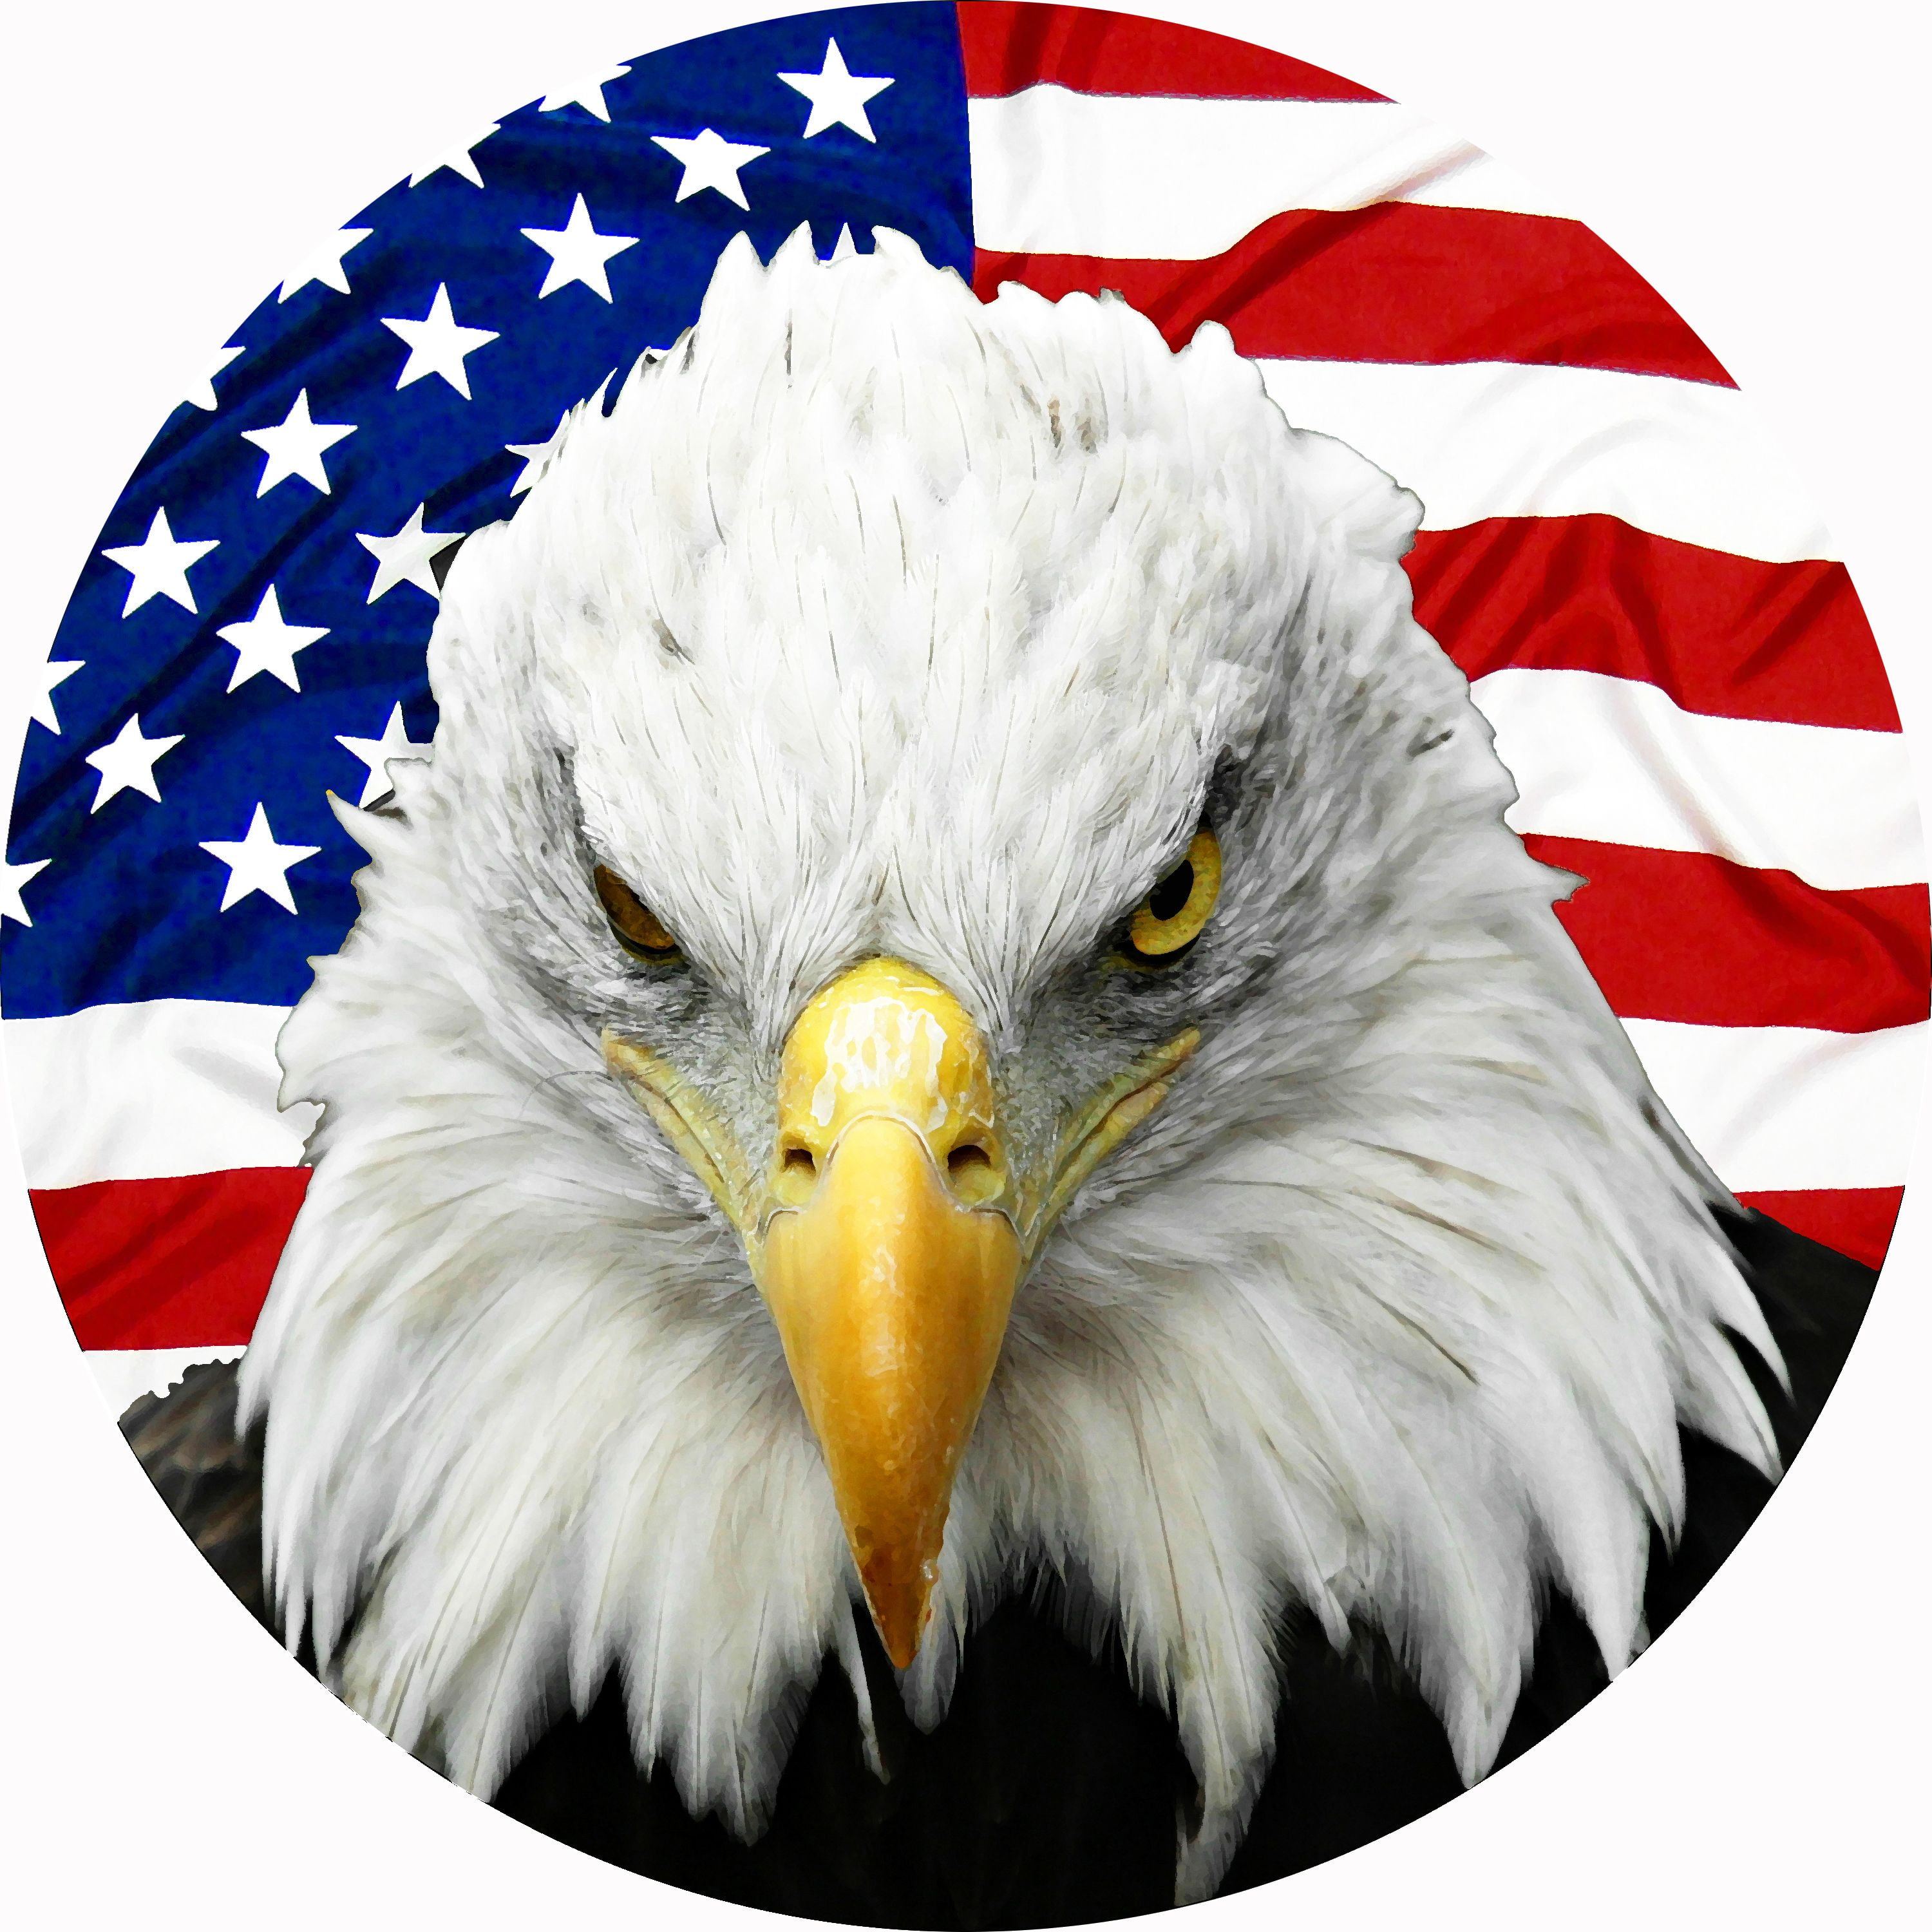 RV Per Gull Spare Tire Cover American Flag and Bald Eagle Waterproof Dust-Proof Universal Spare Wheel Tire Covers Fit for Trailer SUV Truck and Many Vehicle Camper Accessories 